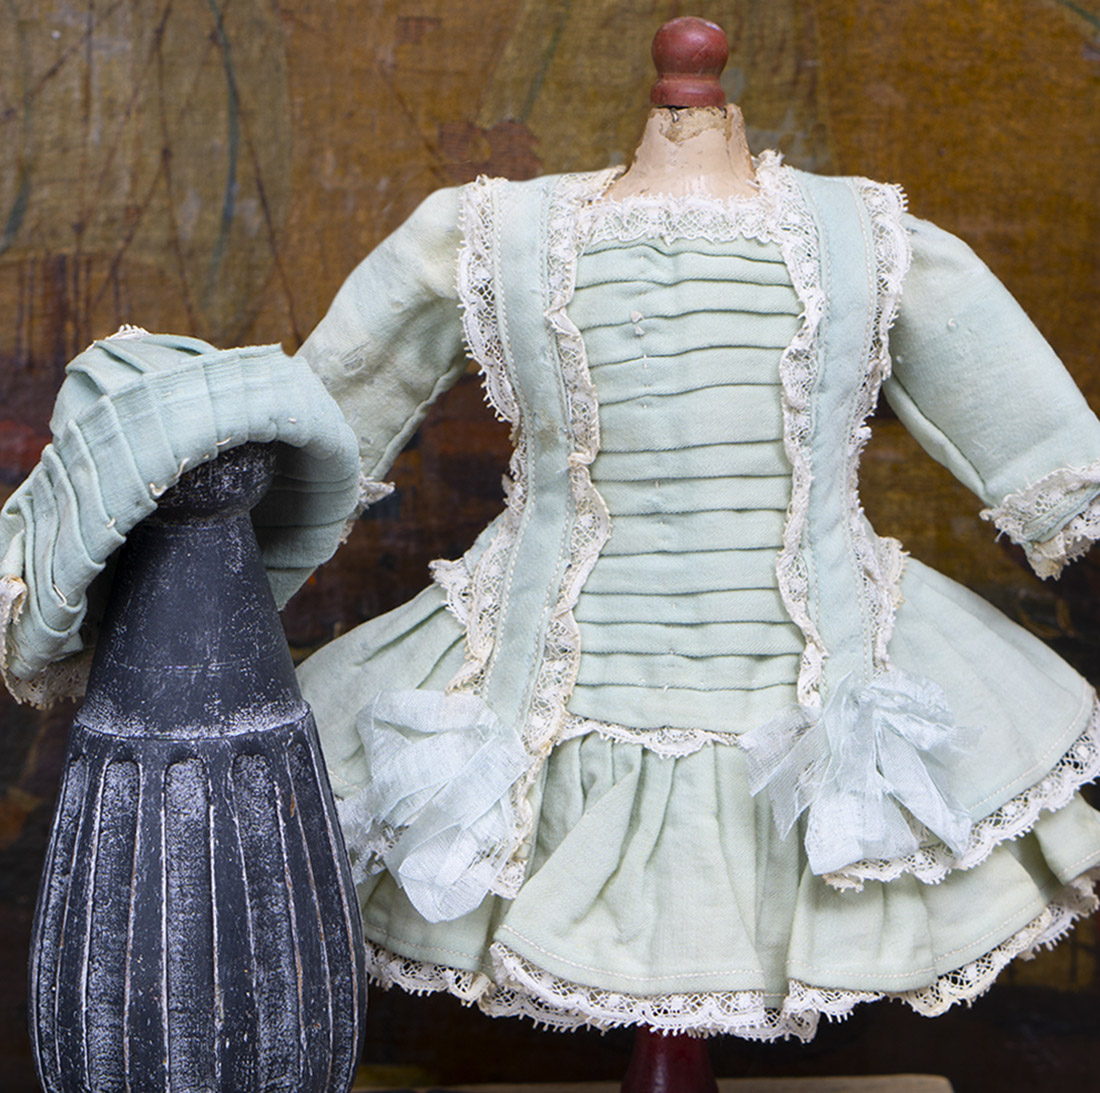 Antique doll dress and hat